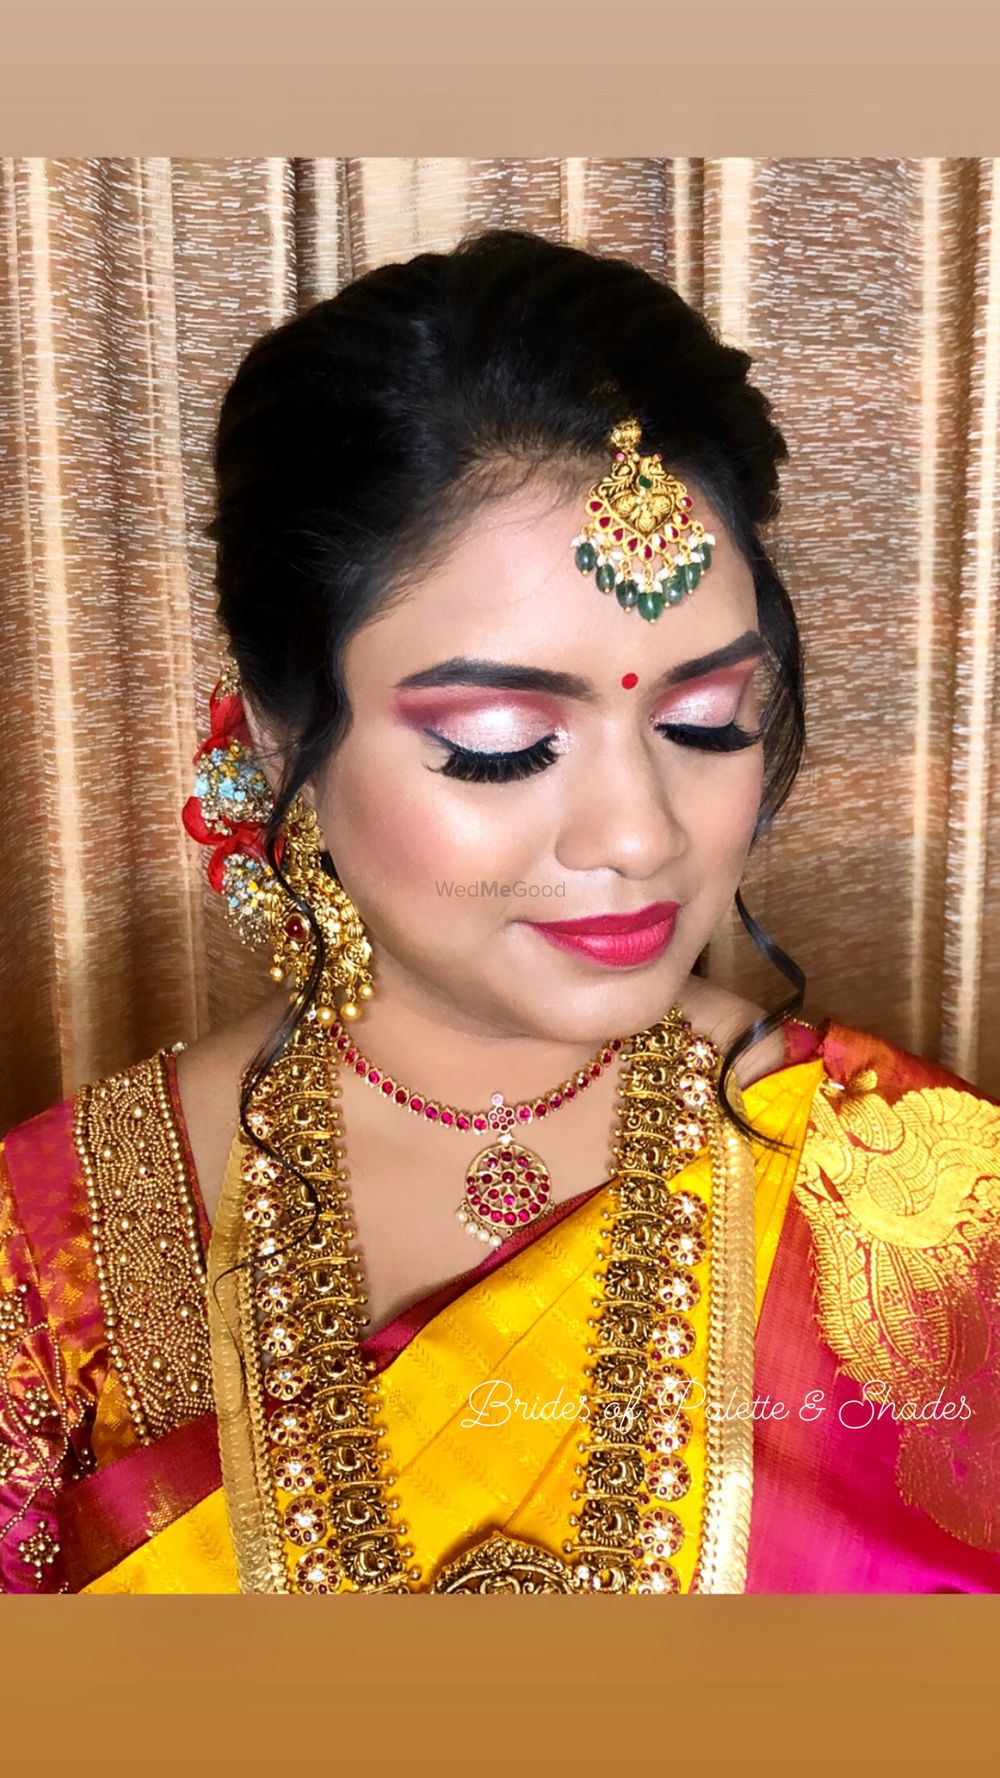 Photo By Palette and Shades - Bridal Makeup